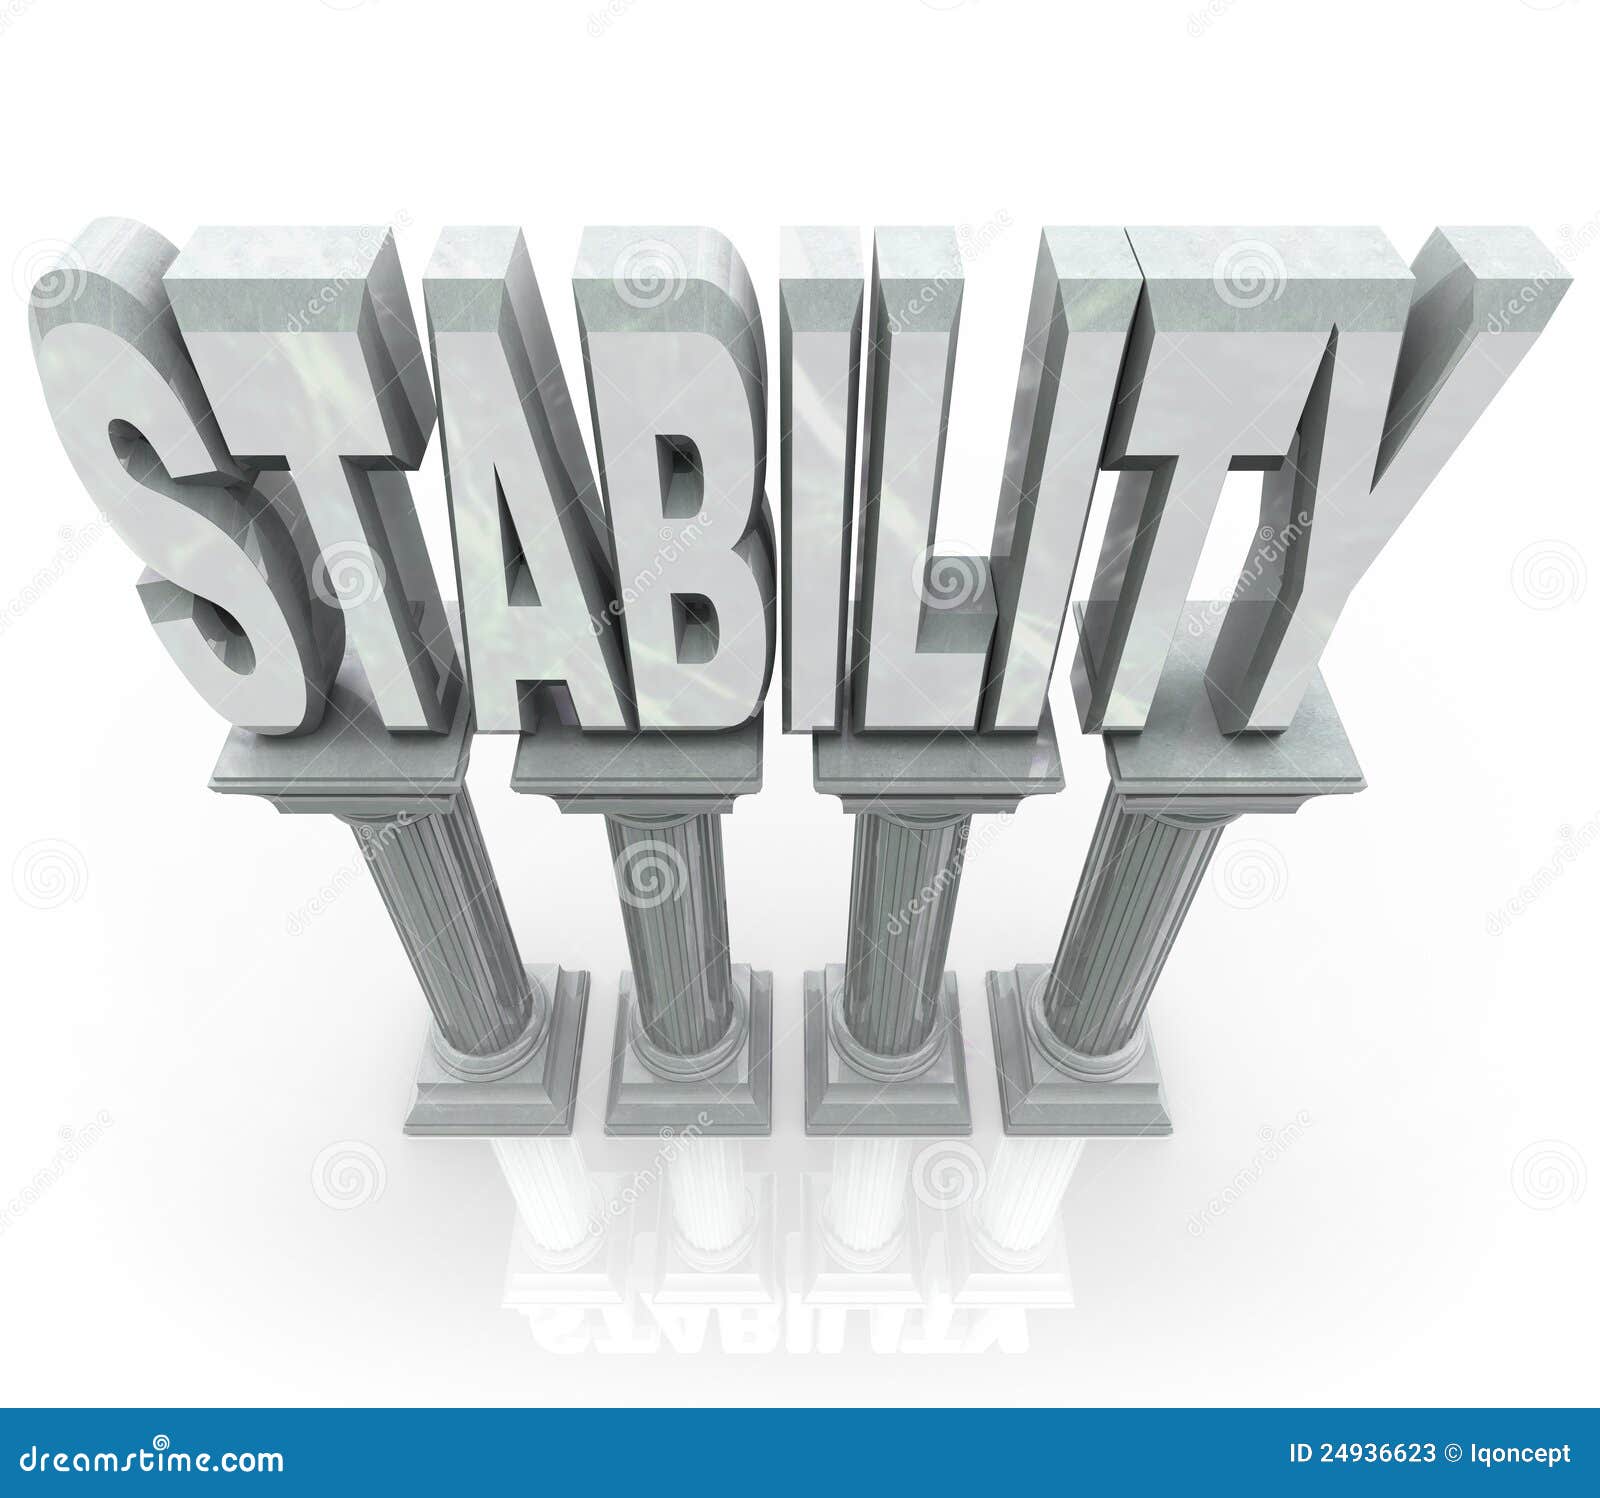 stability-word-columns-strong-support-24936623.jpg